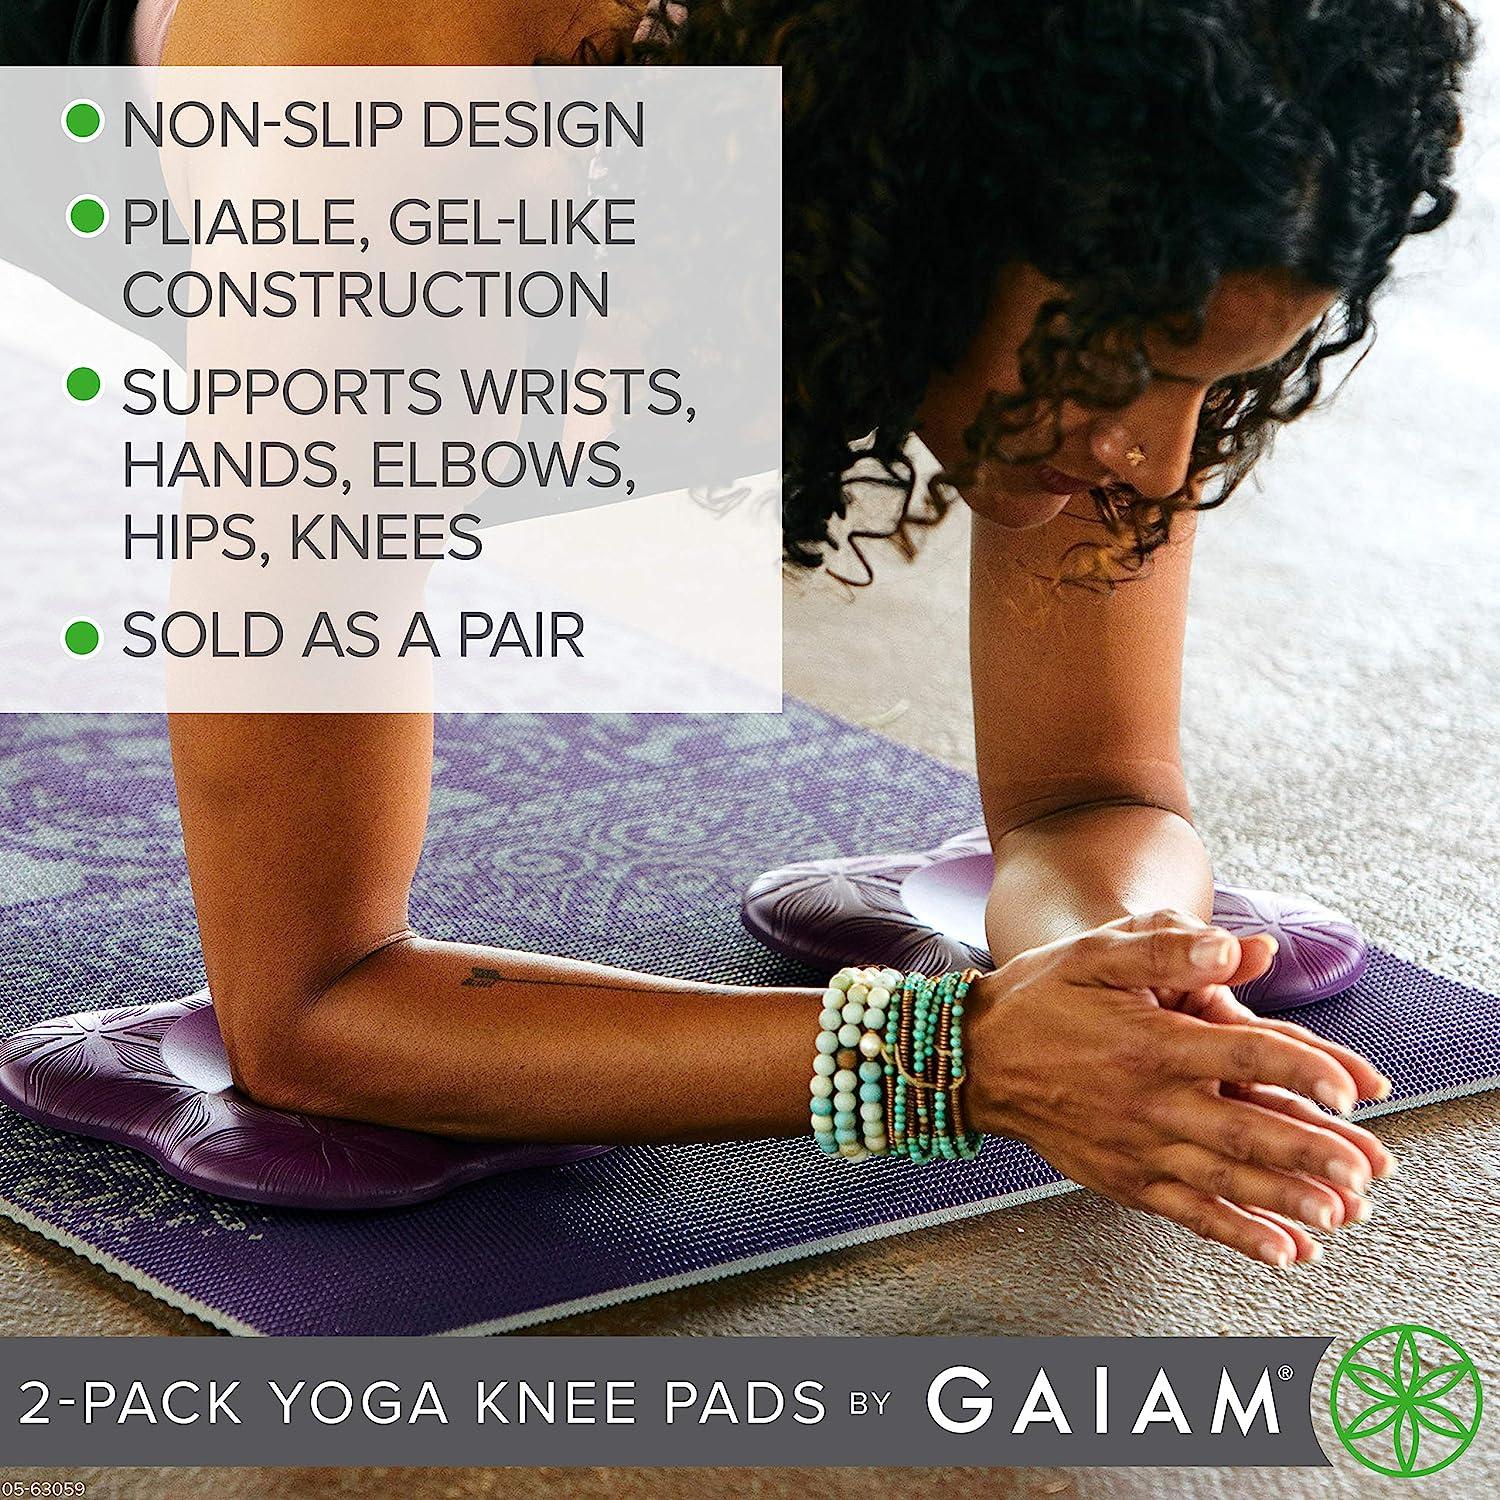 Gaiam Yoga Knee Pads (Set of 2) - Yoga Props and Accessories for Women /  Men Cushions Knees and Elbows for Fitness, Travel, Meditation, Kneeling,  Balance, Floor, Pilates, Mats -  Canada